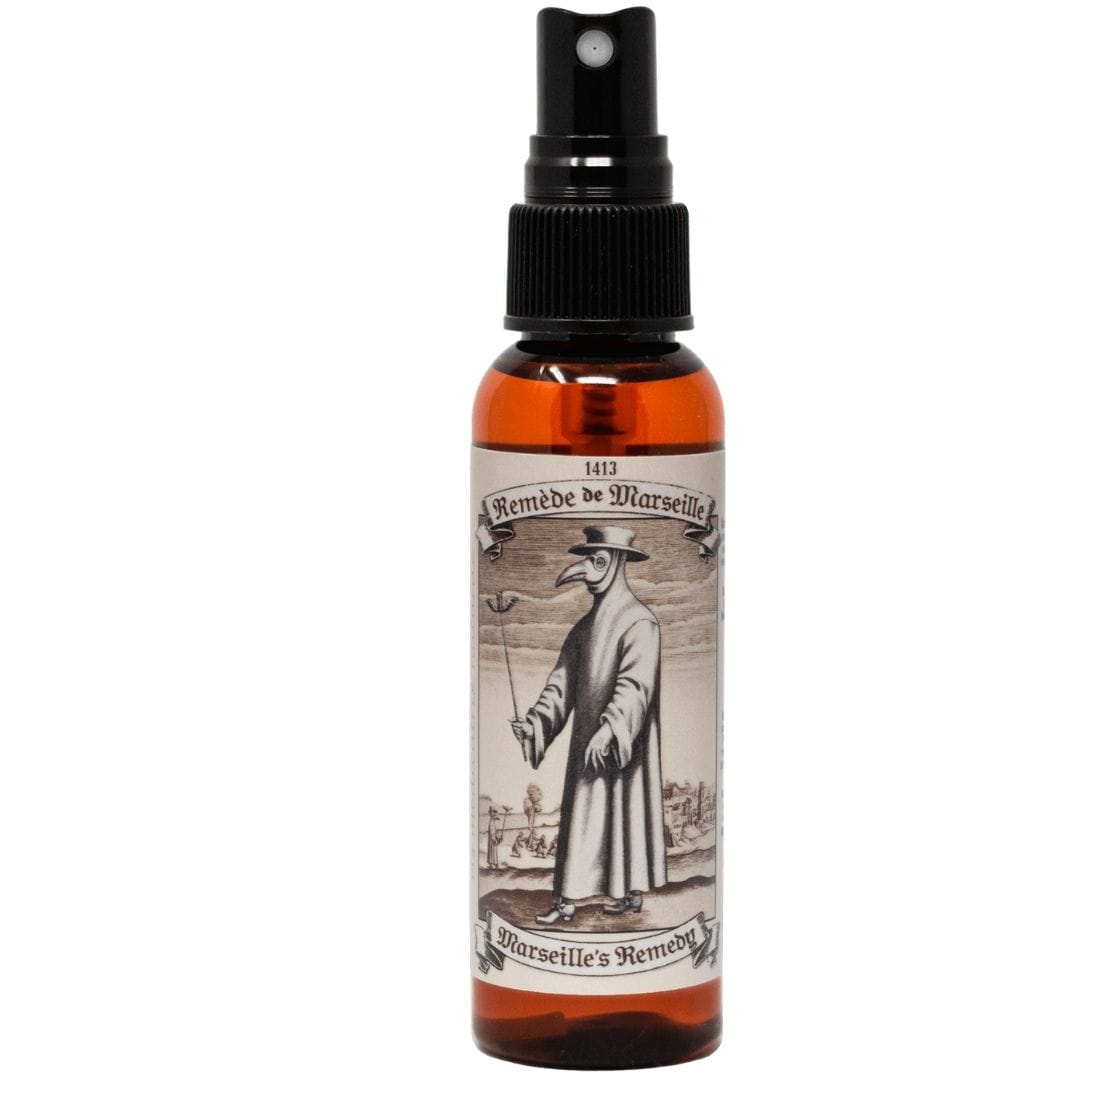 Marseilles Thieves Traditional Hand Sanitizer (75% Grain Alcohol), Clearance 80% Off, Final Sale